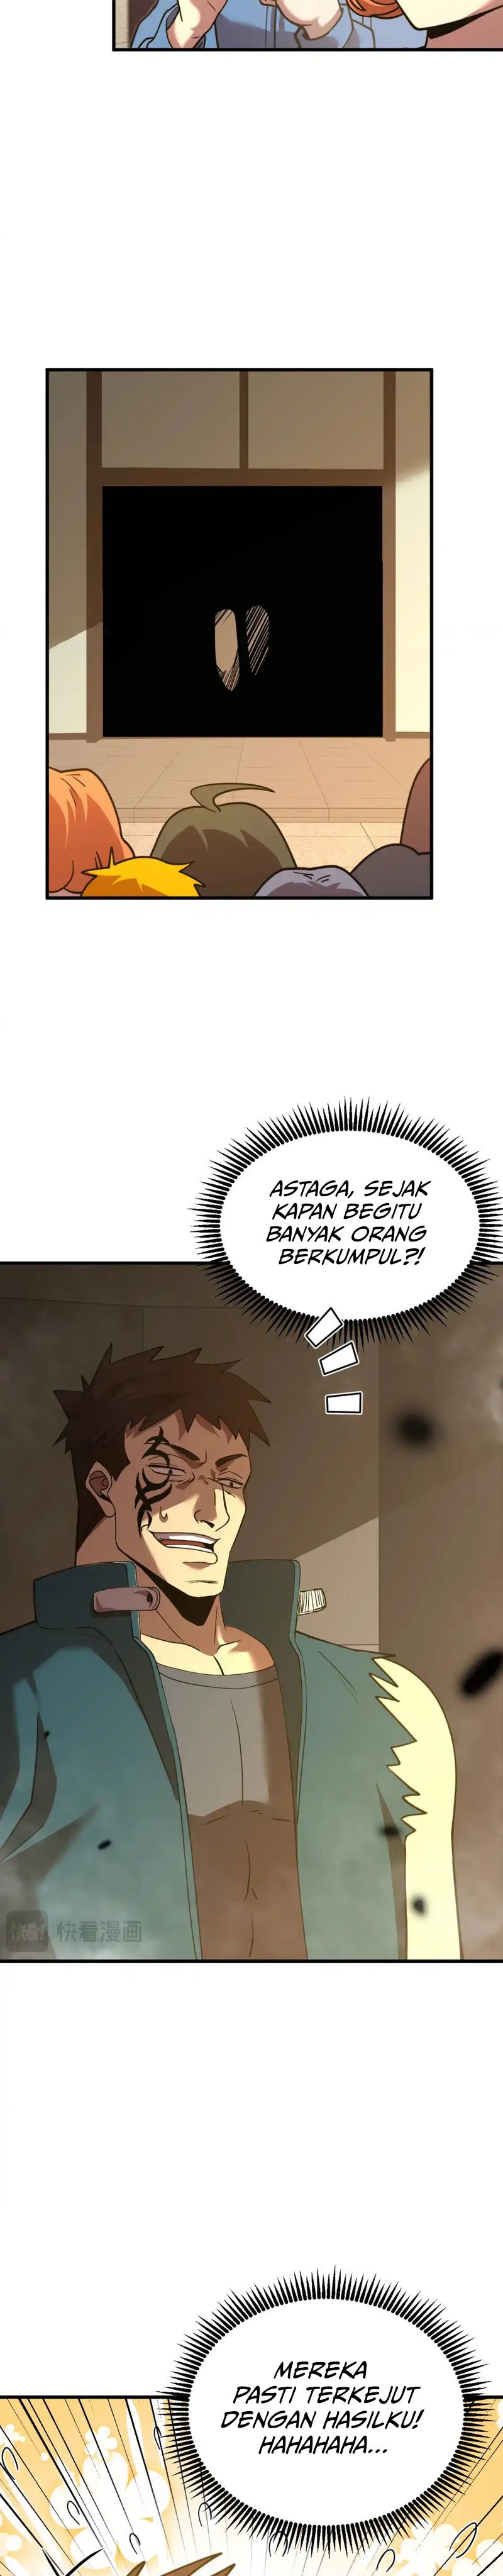 Leveling In The Future (Apex Future Martial Arts) Chapter 85 Image 25